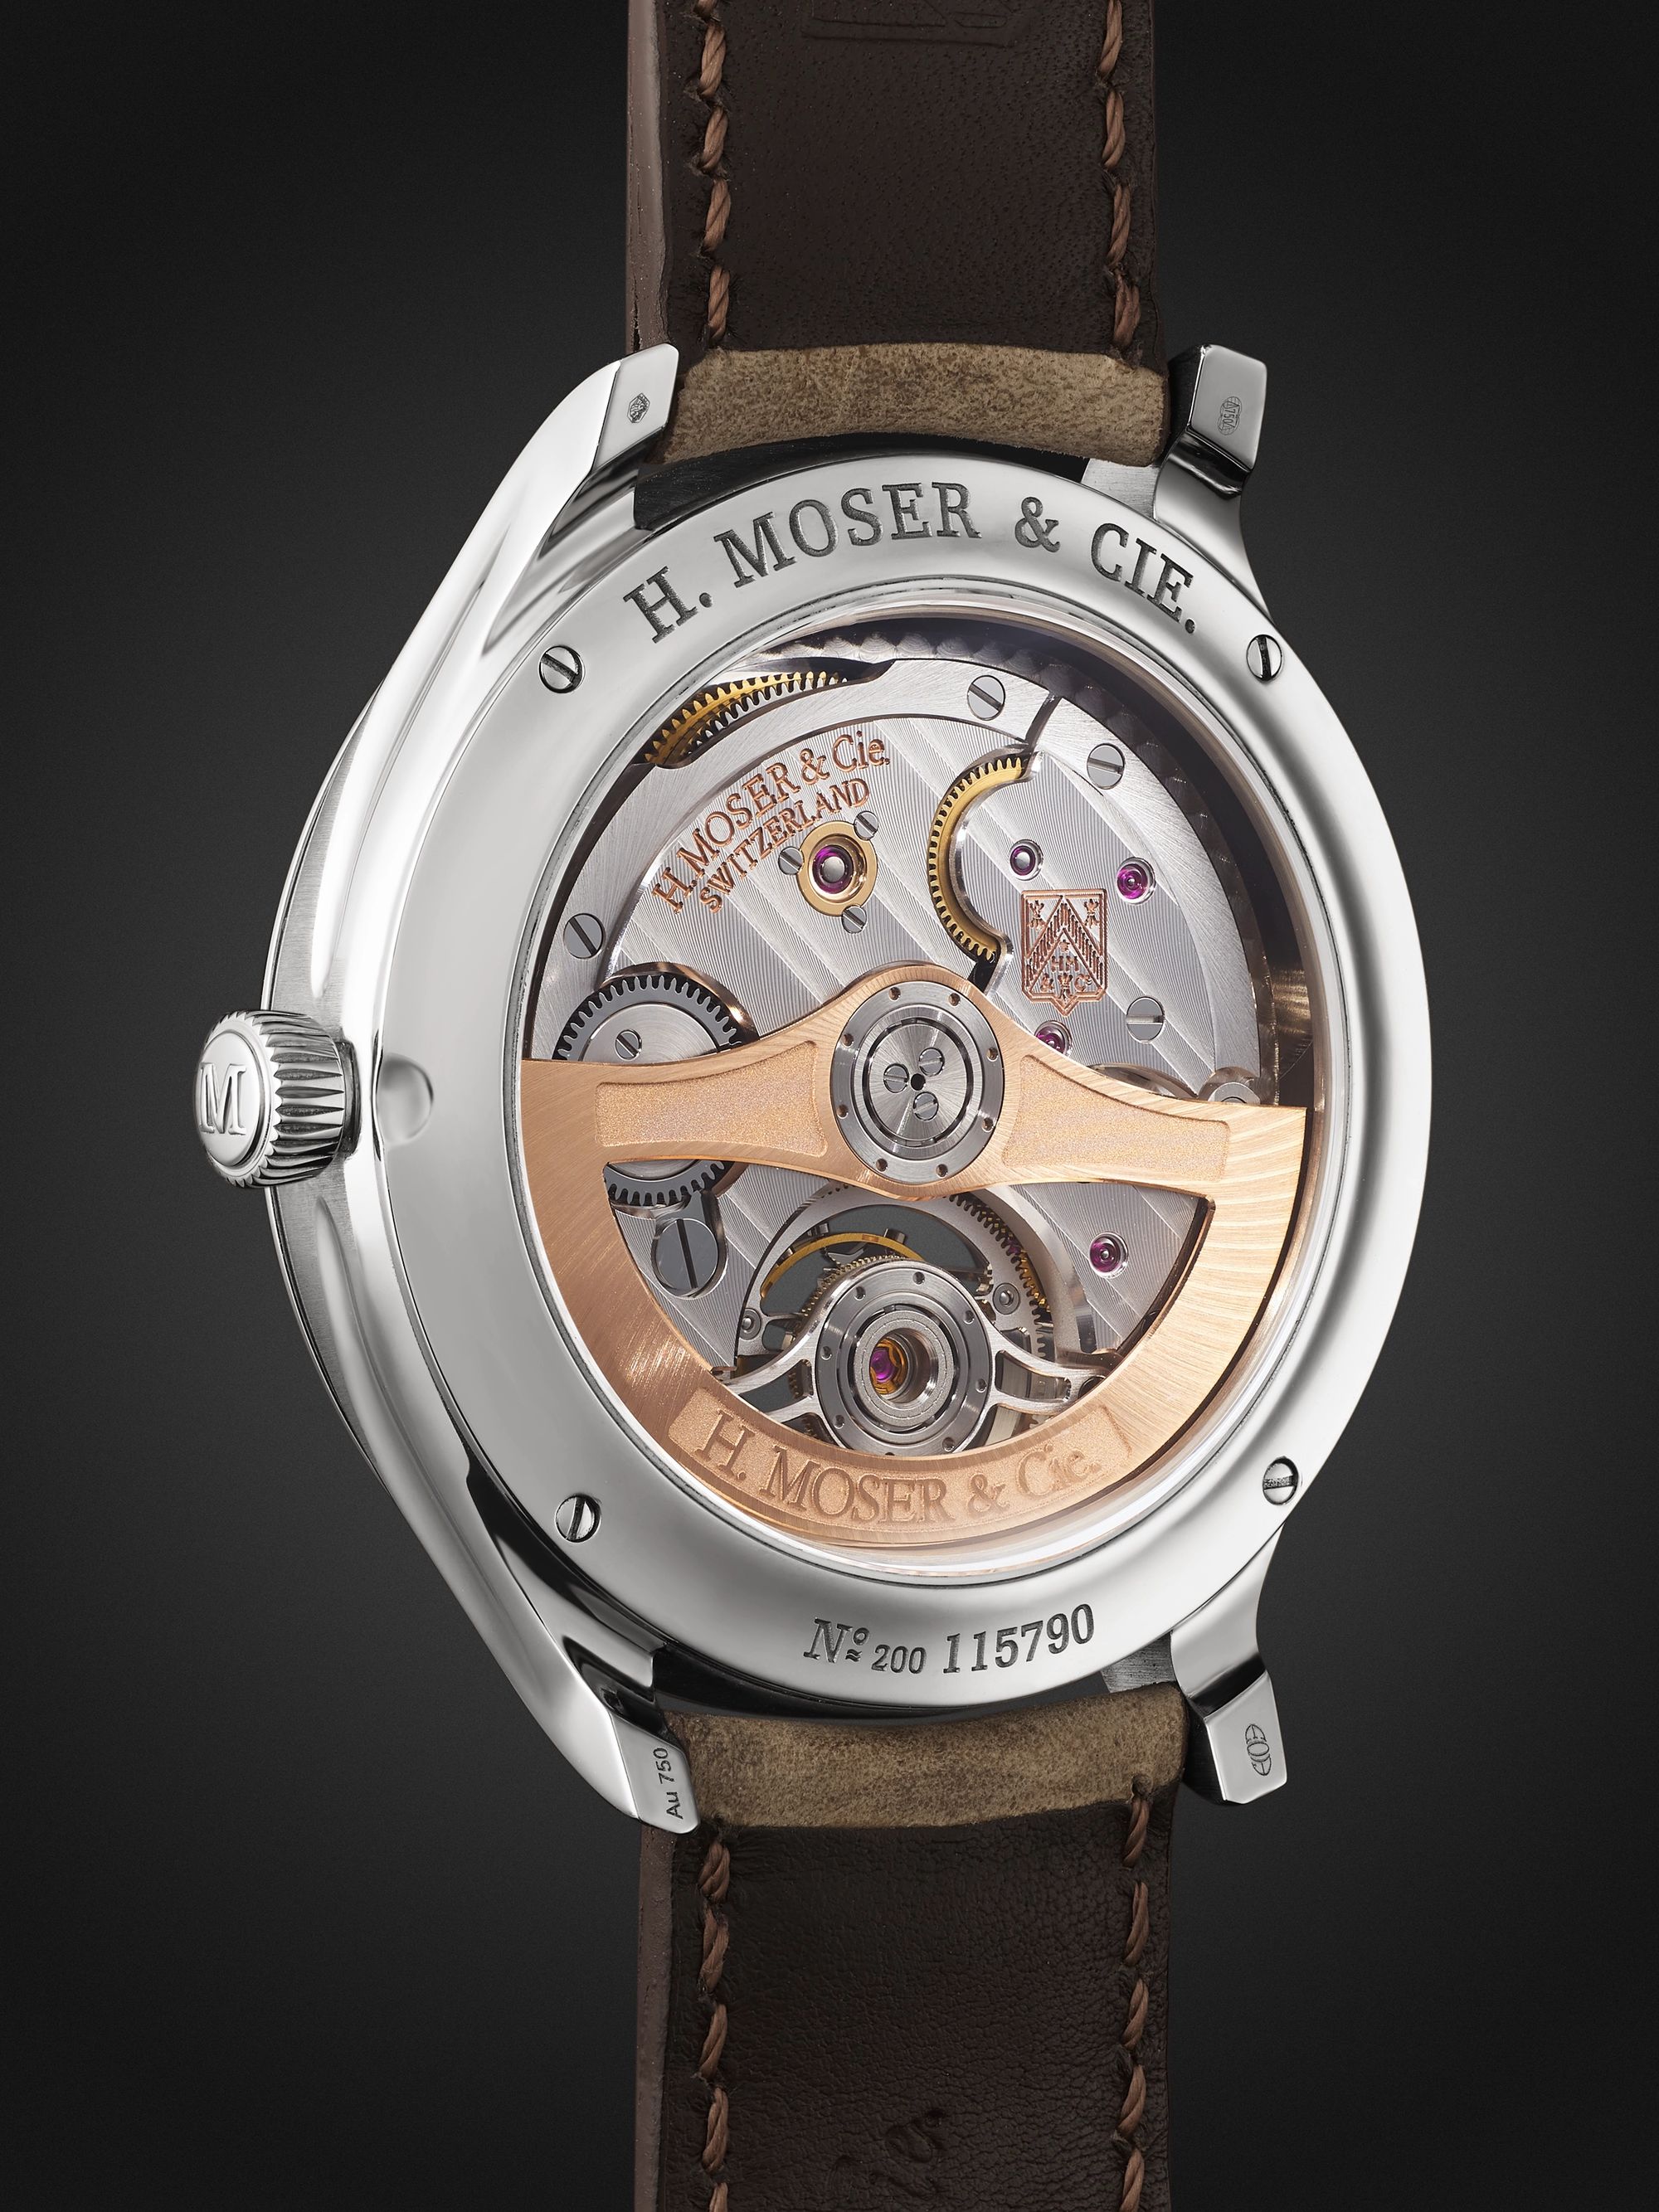 H. MOSER & CIE. Endeavour Automatic Tourbillon 42mm 18-Karat White Gold and Leather Watch, Ref. No. 1804-0201